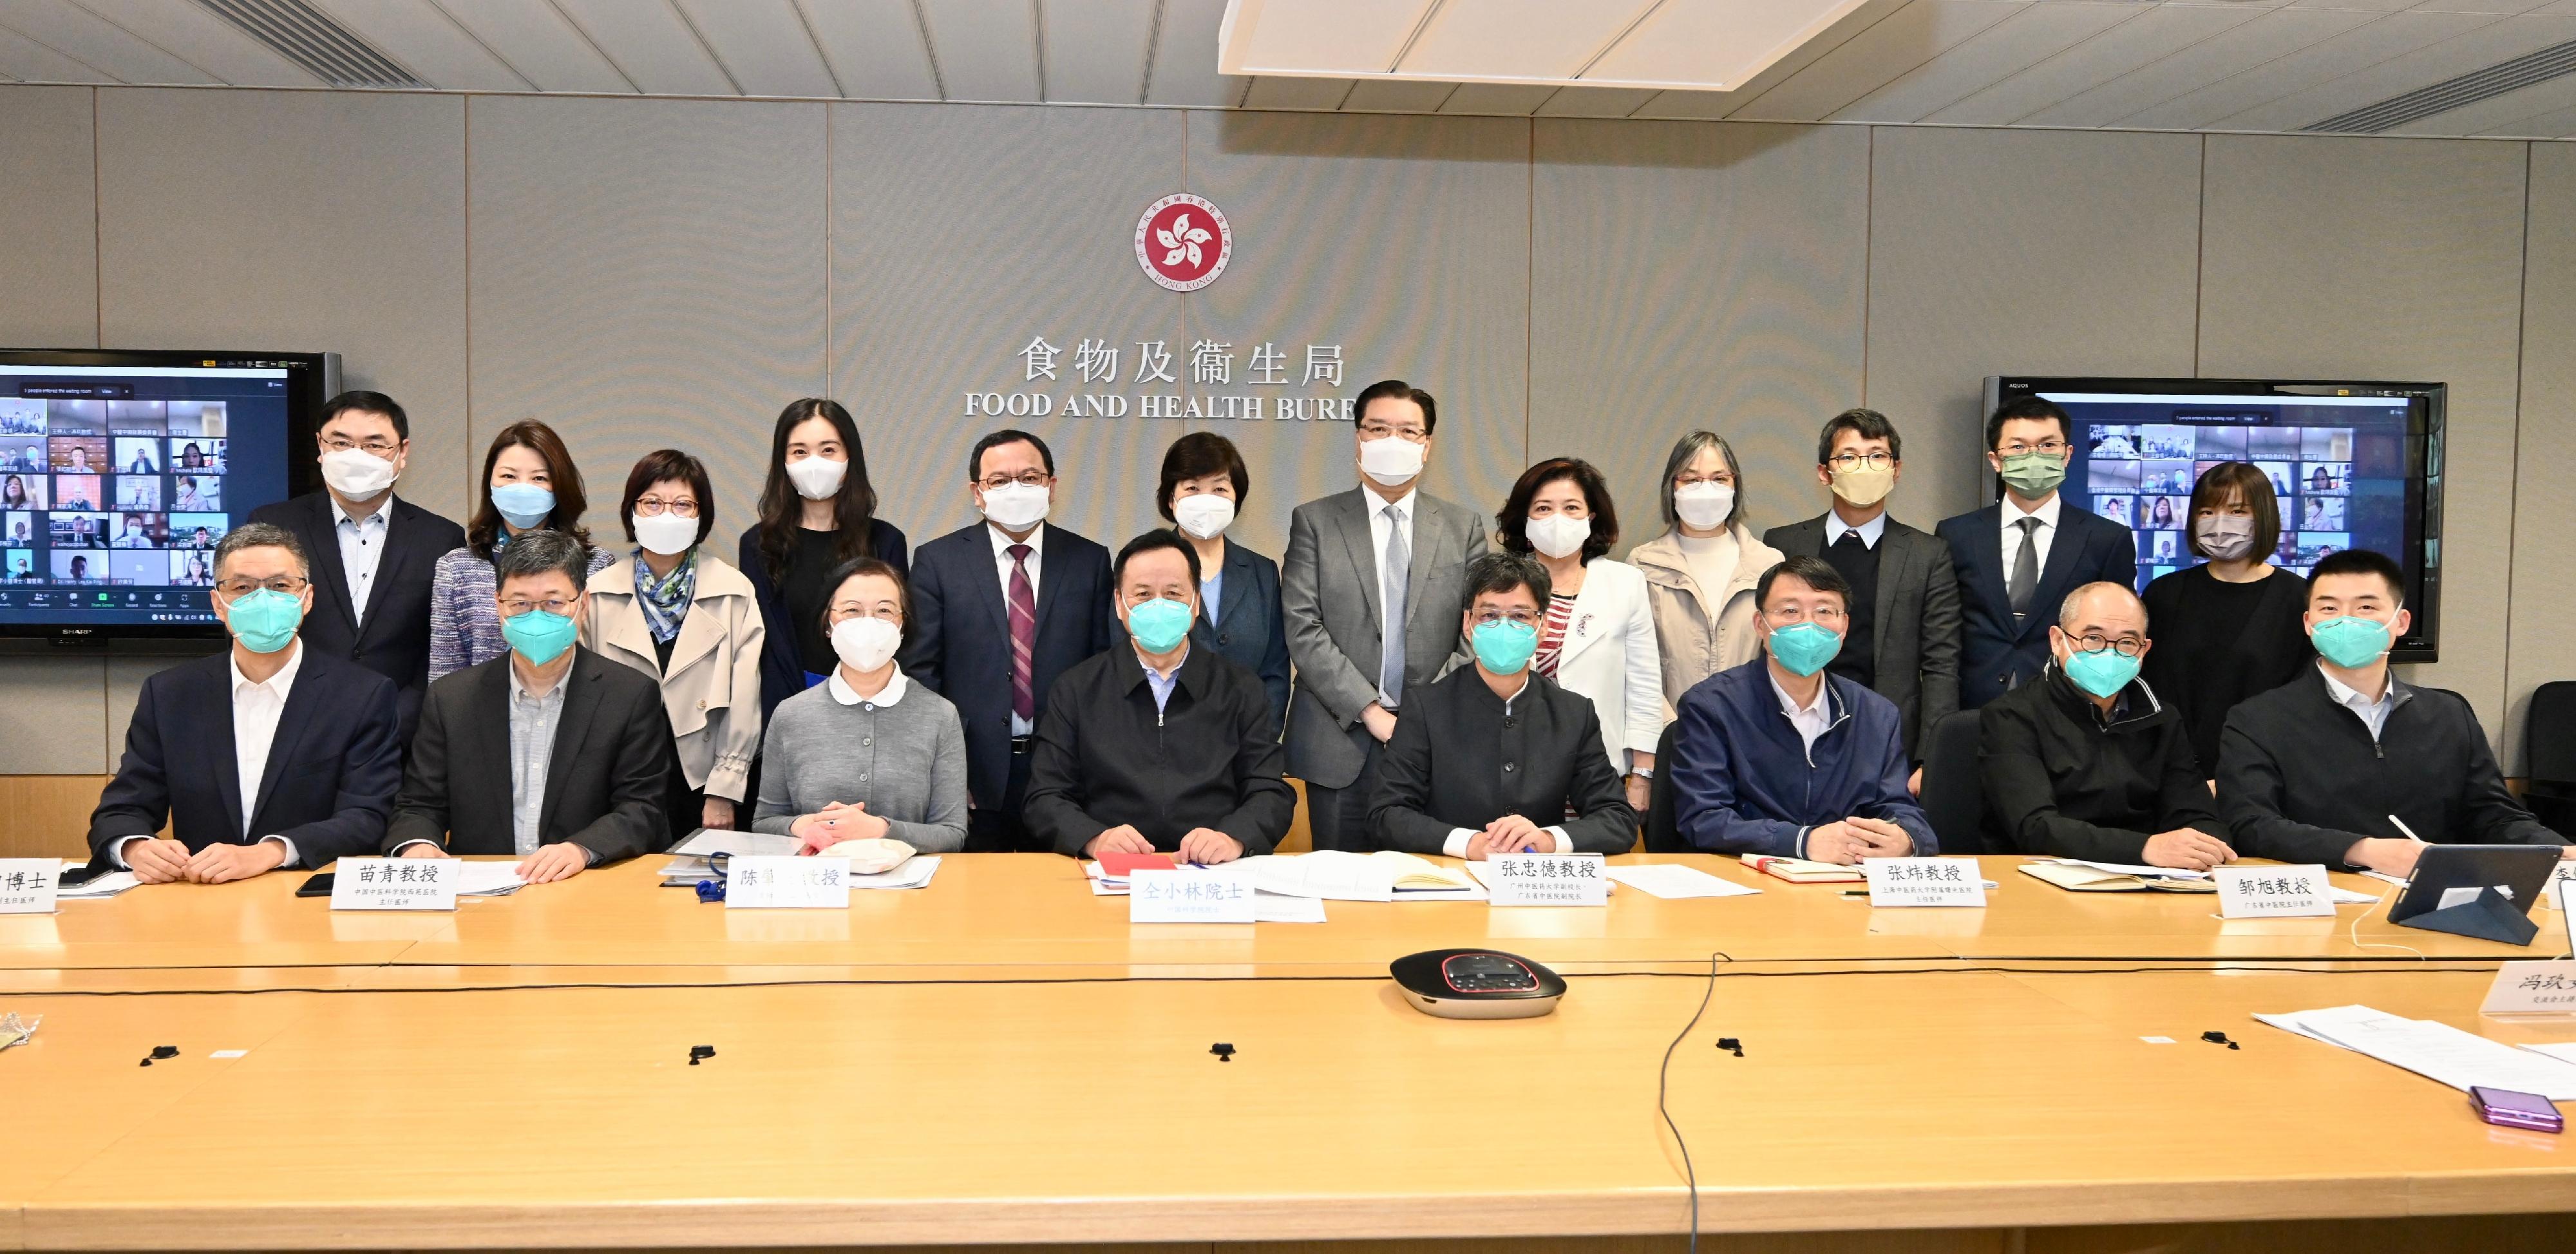 The Secretary for Food and Health, Professor Sophia Chan, and the expert group led by the leader of the Mainland Chinese medicine (CM) expert group of the Central Authorities, Mr Tong Xiaolin, participated in the meeting on the CM anti-epidemic plans for clinical application this afternoon (April 5). Photo shows Professor Chan (front row, third left); Mr Tong (front row, fourth left);  the deputy leader of the expert group, Professor Zhang Zhongde (front row, fourth right);  the Chairman of the Chinese Medicine Practice Subcommittee under the Chinese Medicine Development Committee (CMDC), Professor Chan Wing-kwong (back row, fifth left); and the Chairman of the Chinese Medicines Industry Subcommittee under the CMDC, Mr Tommy Li (back row, seventh left); the Chairman of the Chinese Medicine Council of Hong Kong (CMCHK), Mrs Jeanie Hu (back row, fifth right); the Chairman of the Chinese Medicine Practitioners Board under the CMCHK, Dr Wong Yu-yeuk (back row, fourth right); the former Chairman of the Chinese Medicine Practice Subcommittee under the CMDC,  Professor Feng Jiu (back row, sixth left); the Head of the Chinese Medicine Unit of the Food and Health Bureau (FHB), Ms Ellen Chan (back row, fourth left); and other representatives from the FHB, Department of Health and Hospital Authority at the meeting.

 
